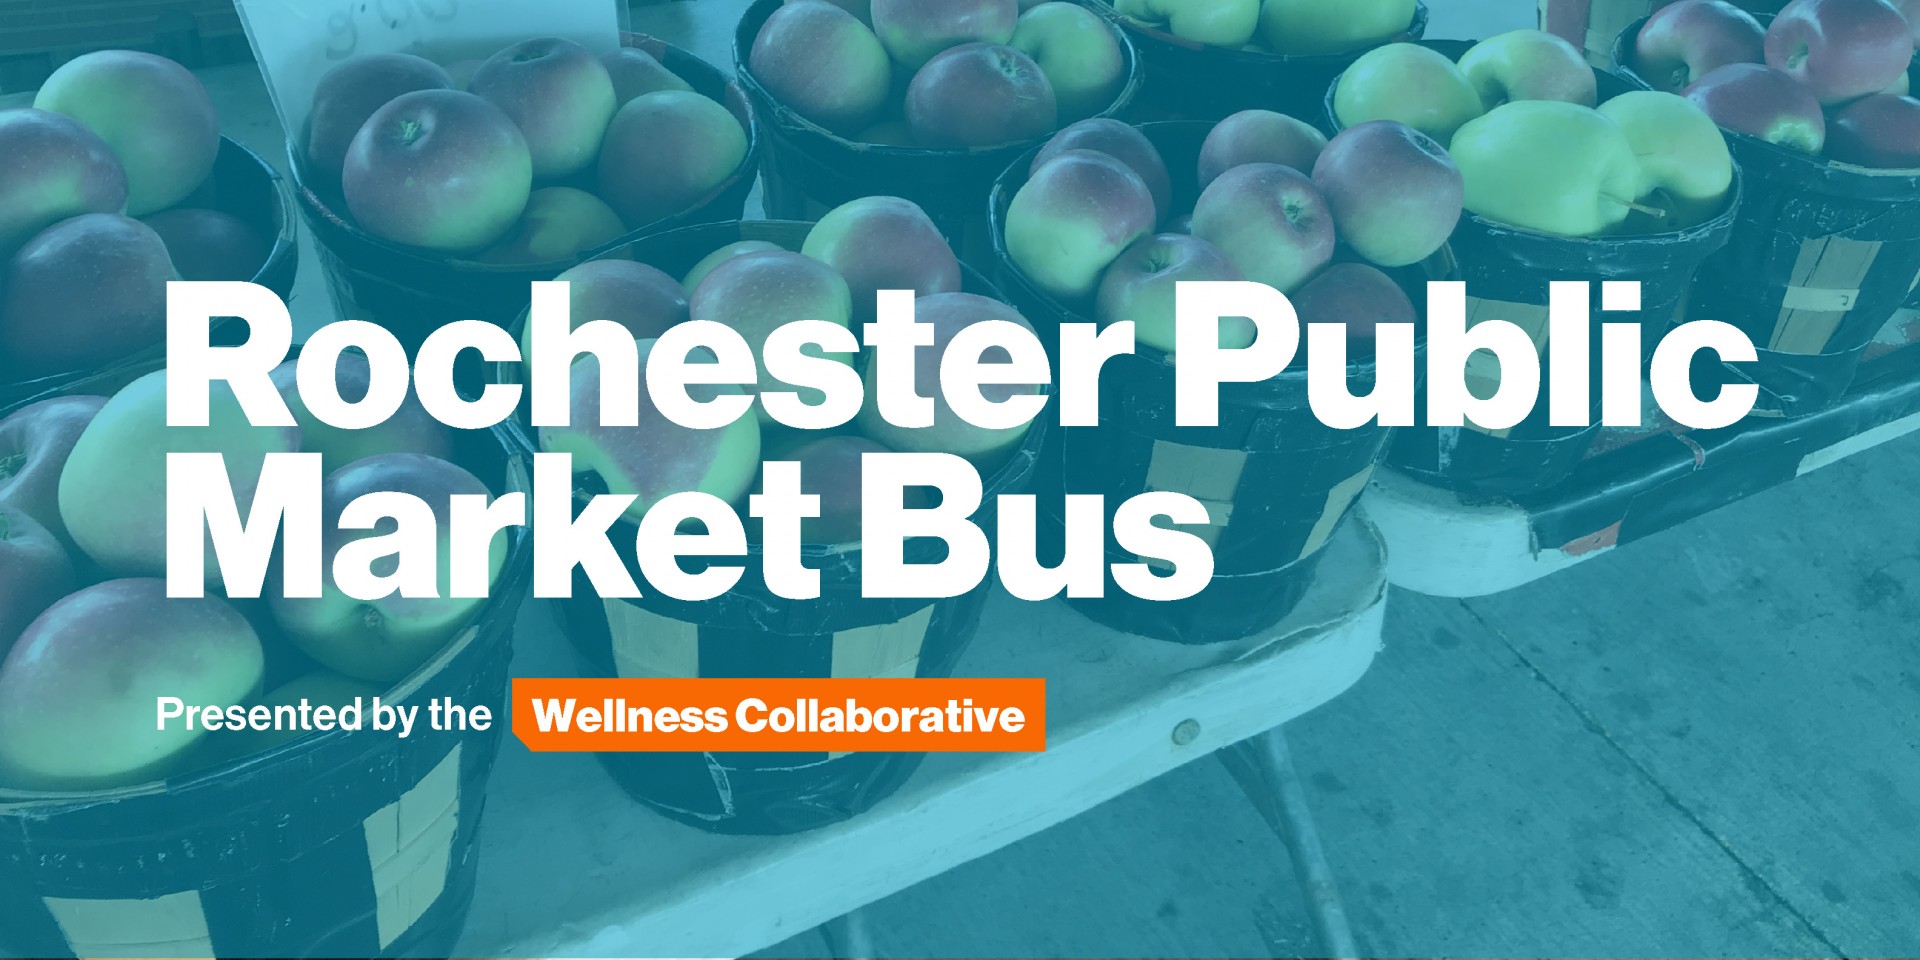 Rochester Public Market Bus Presented by the Wellness Collaborative